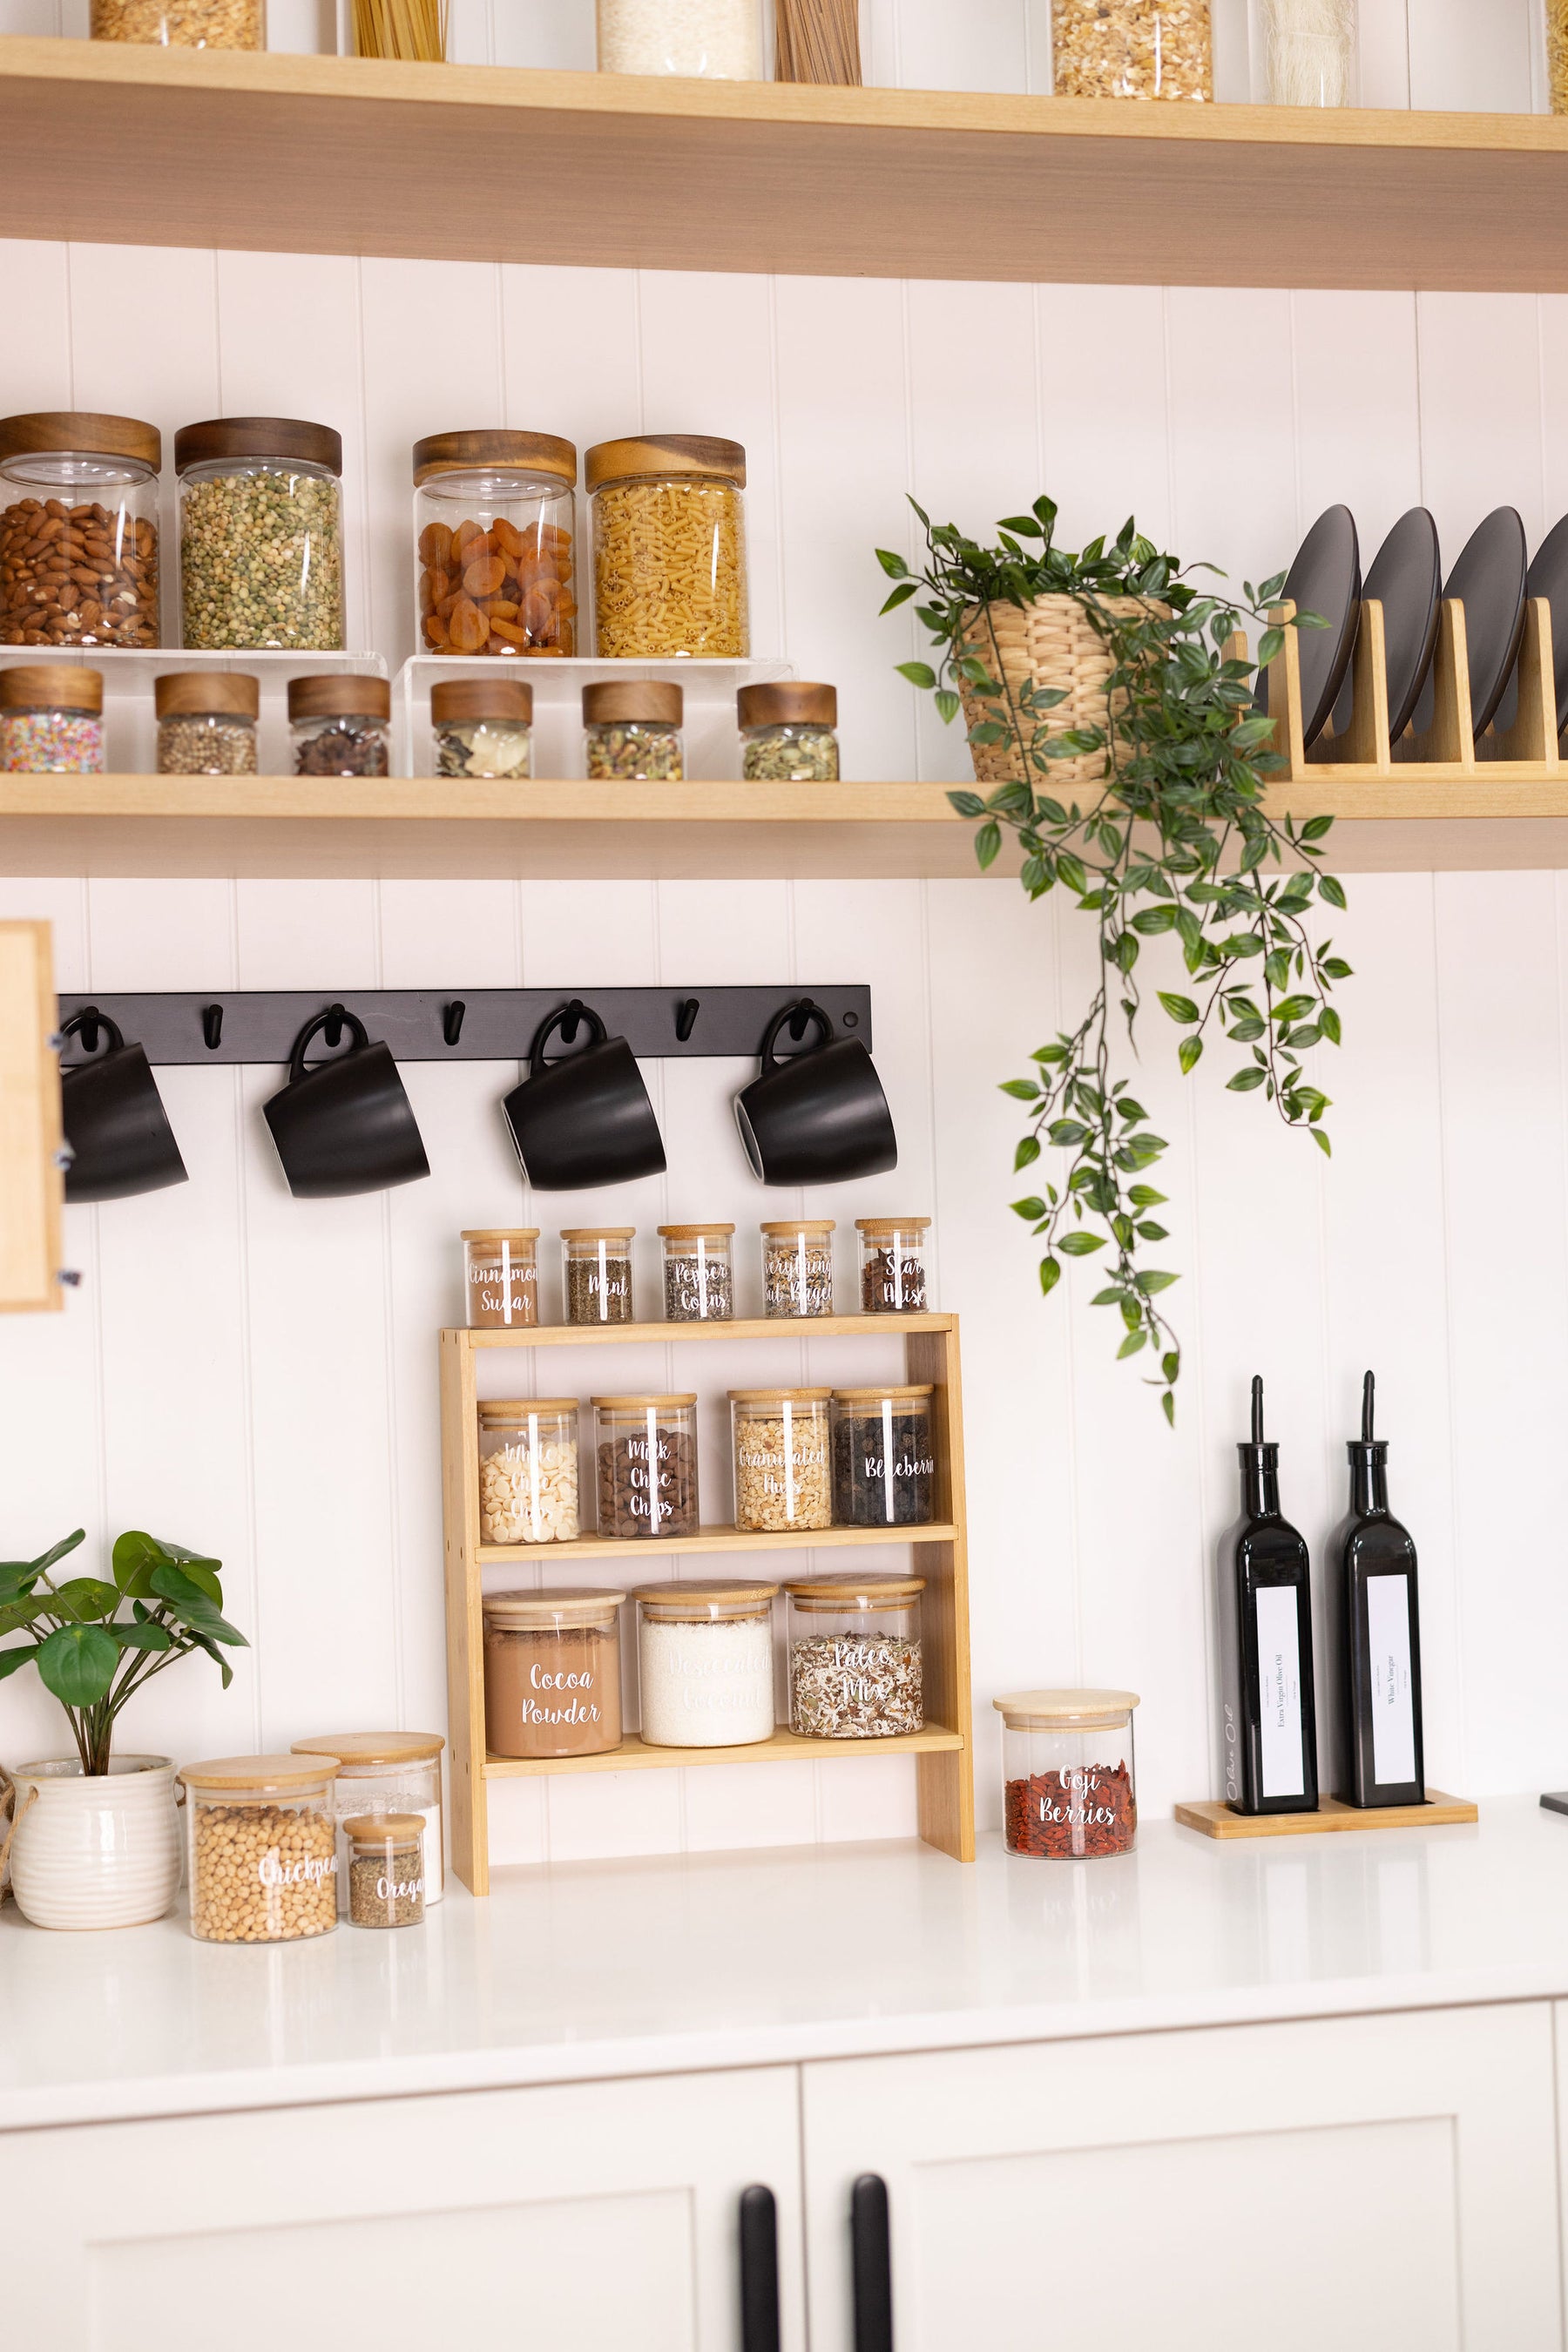 Getting Spicy In The Kitchen: A Guide to Organising Herbs and Spices